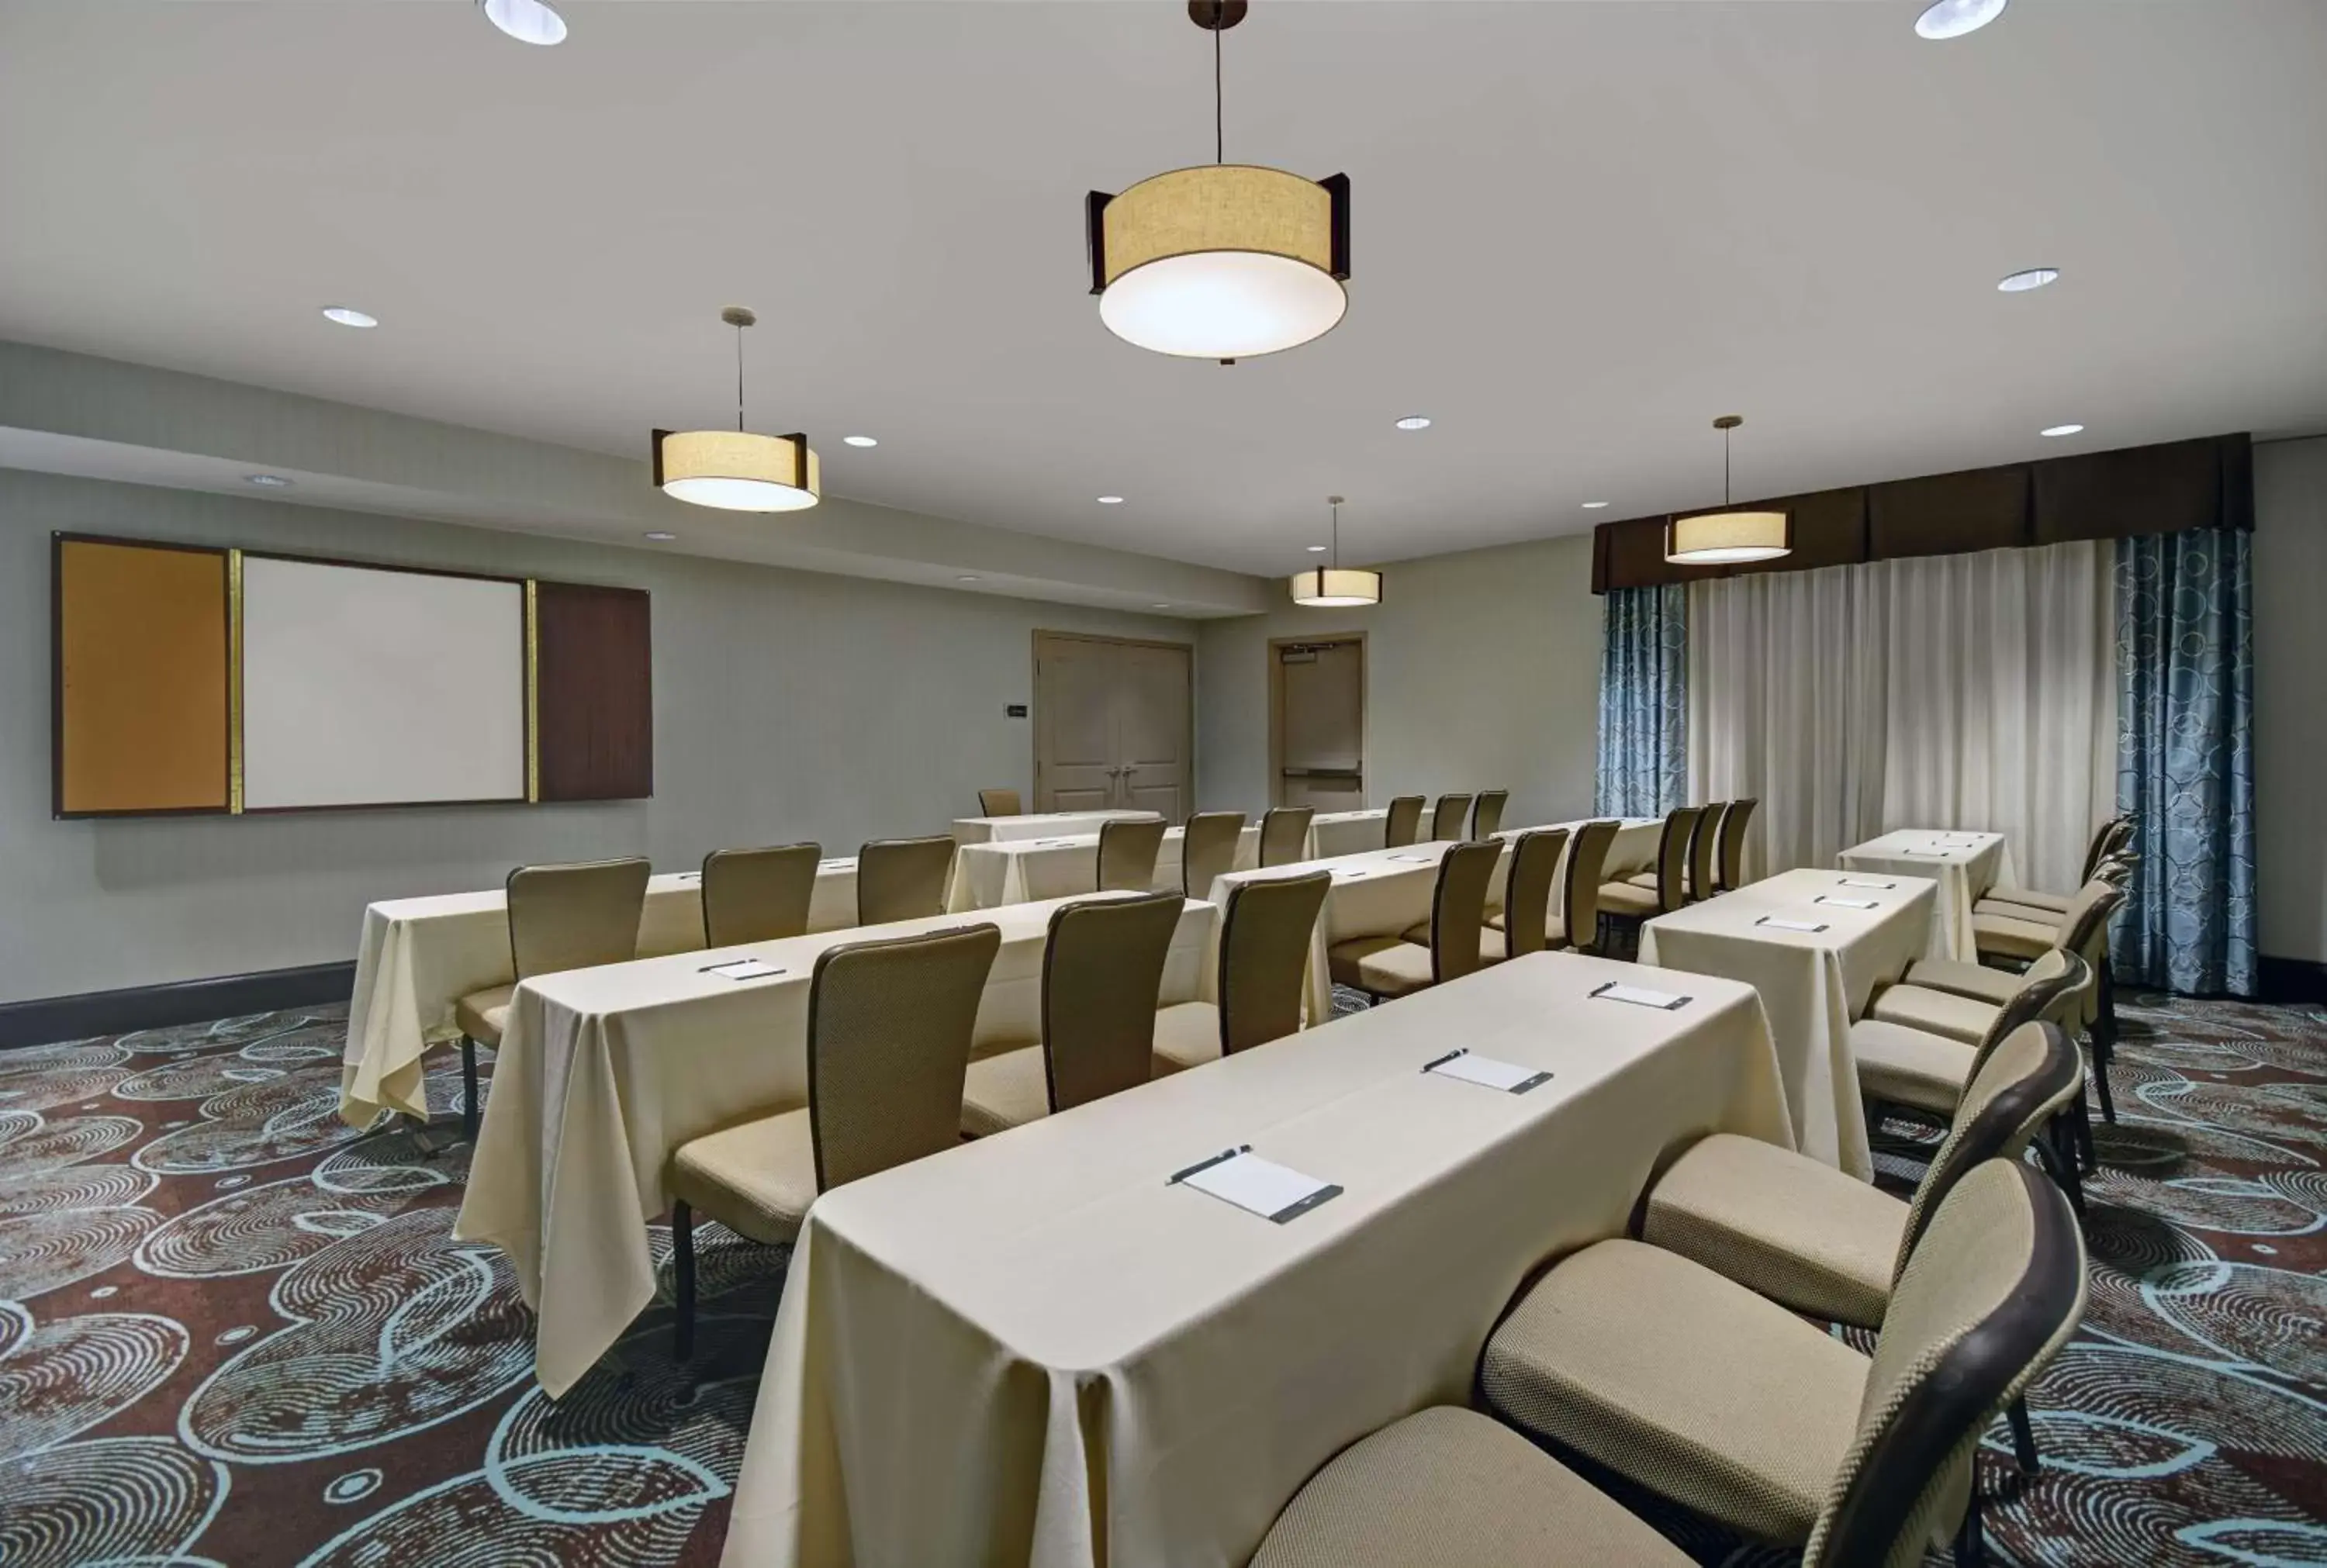 Meeting/conference room in Homewood Suites by Hilton Hamilton, NJ